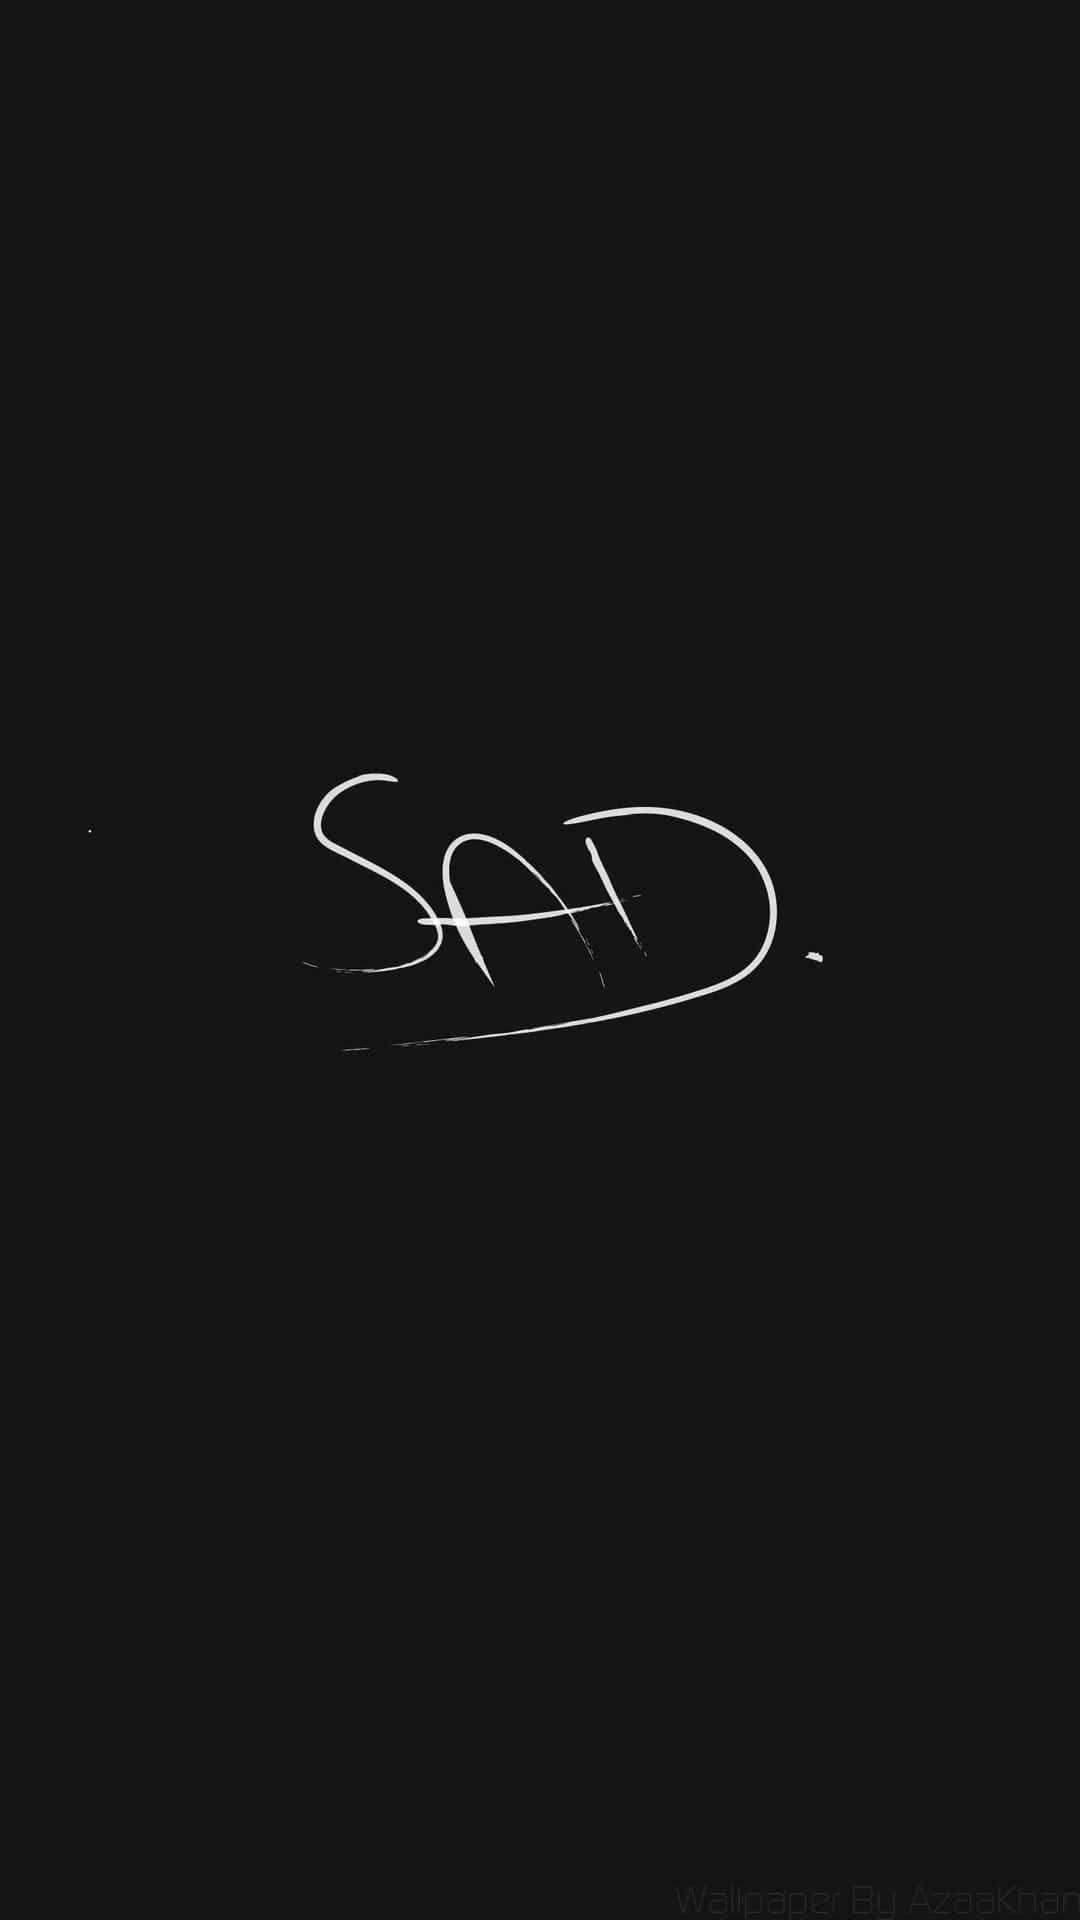 Sad Wallpapers For Your Phone Wallpaper